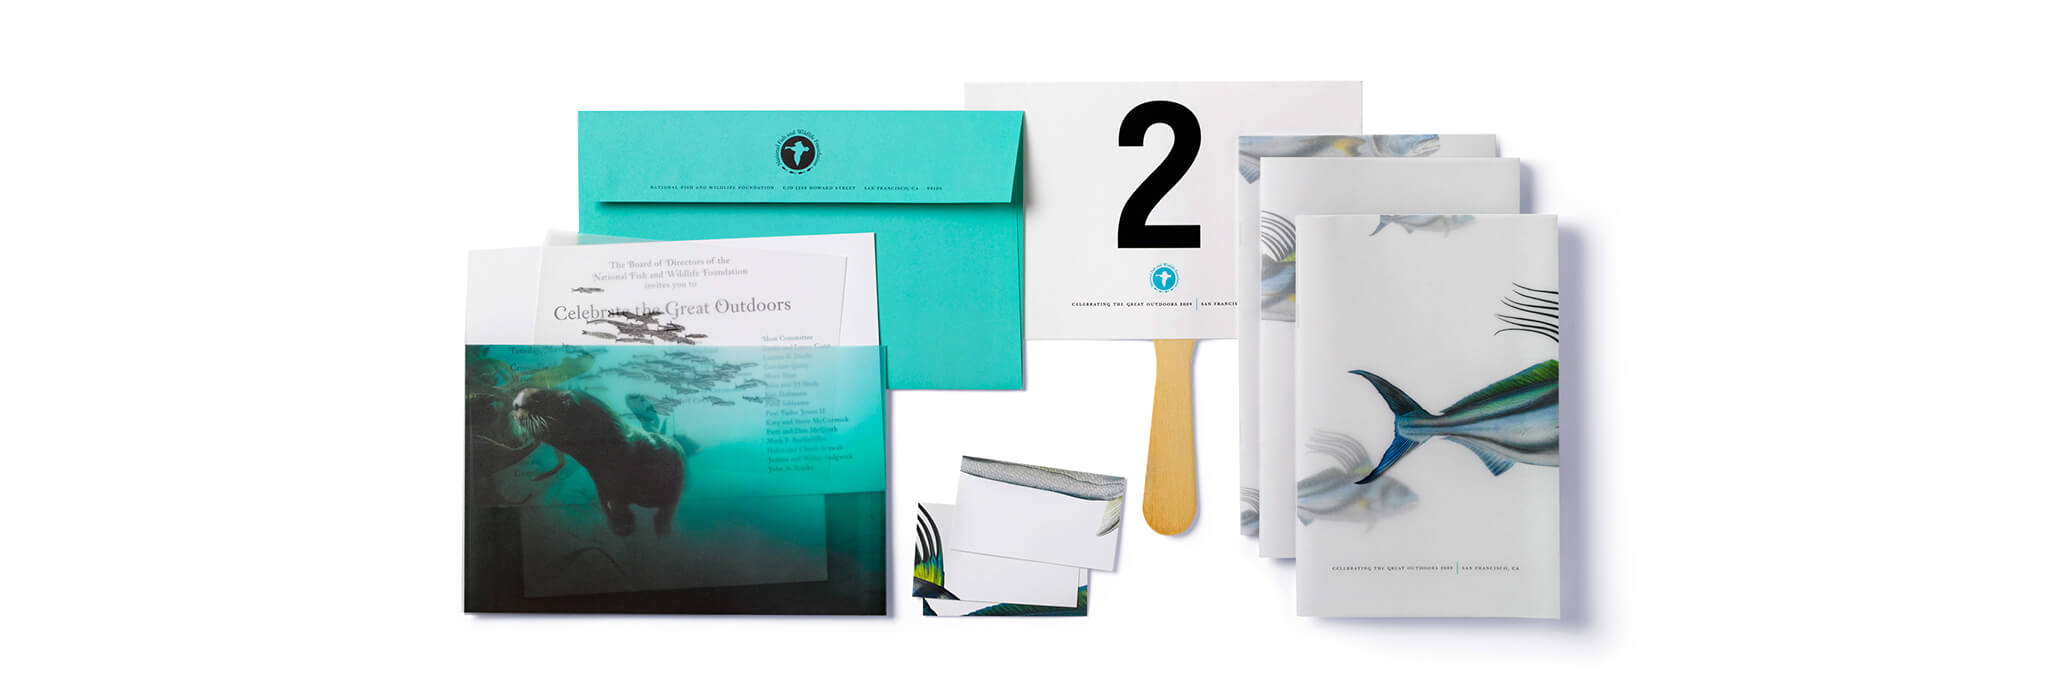 Sea creature themed program books, cards, invitation with teal envelope, and #2 paddle